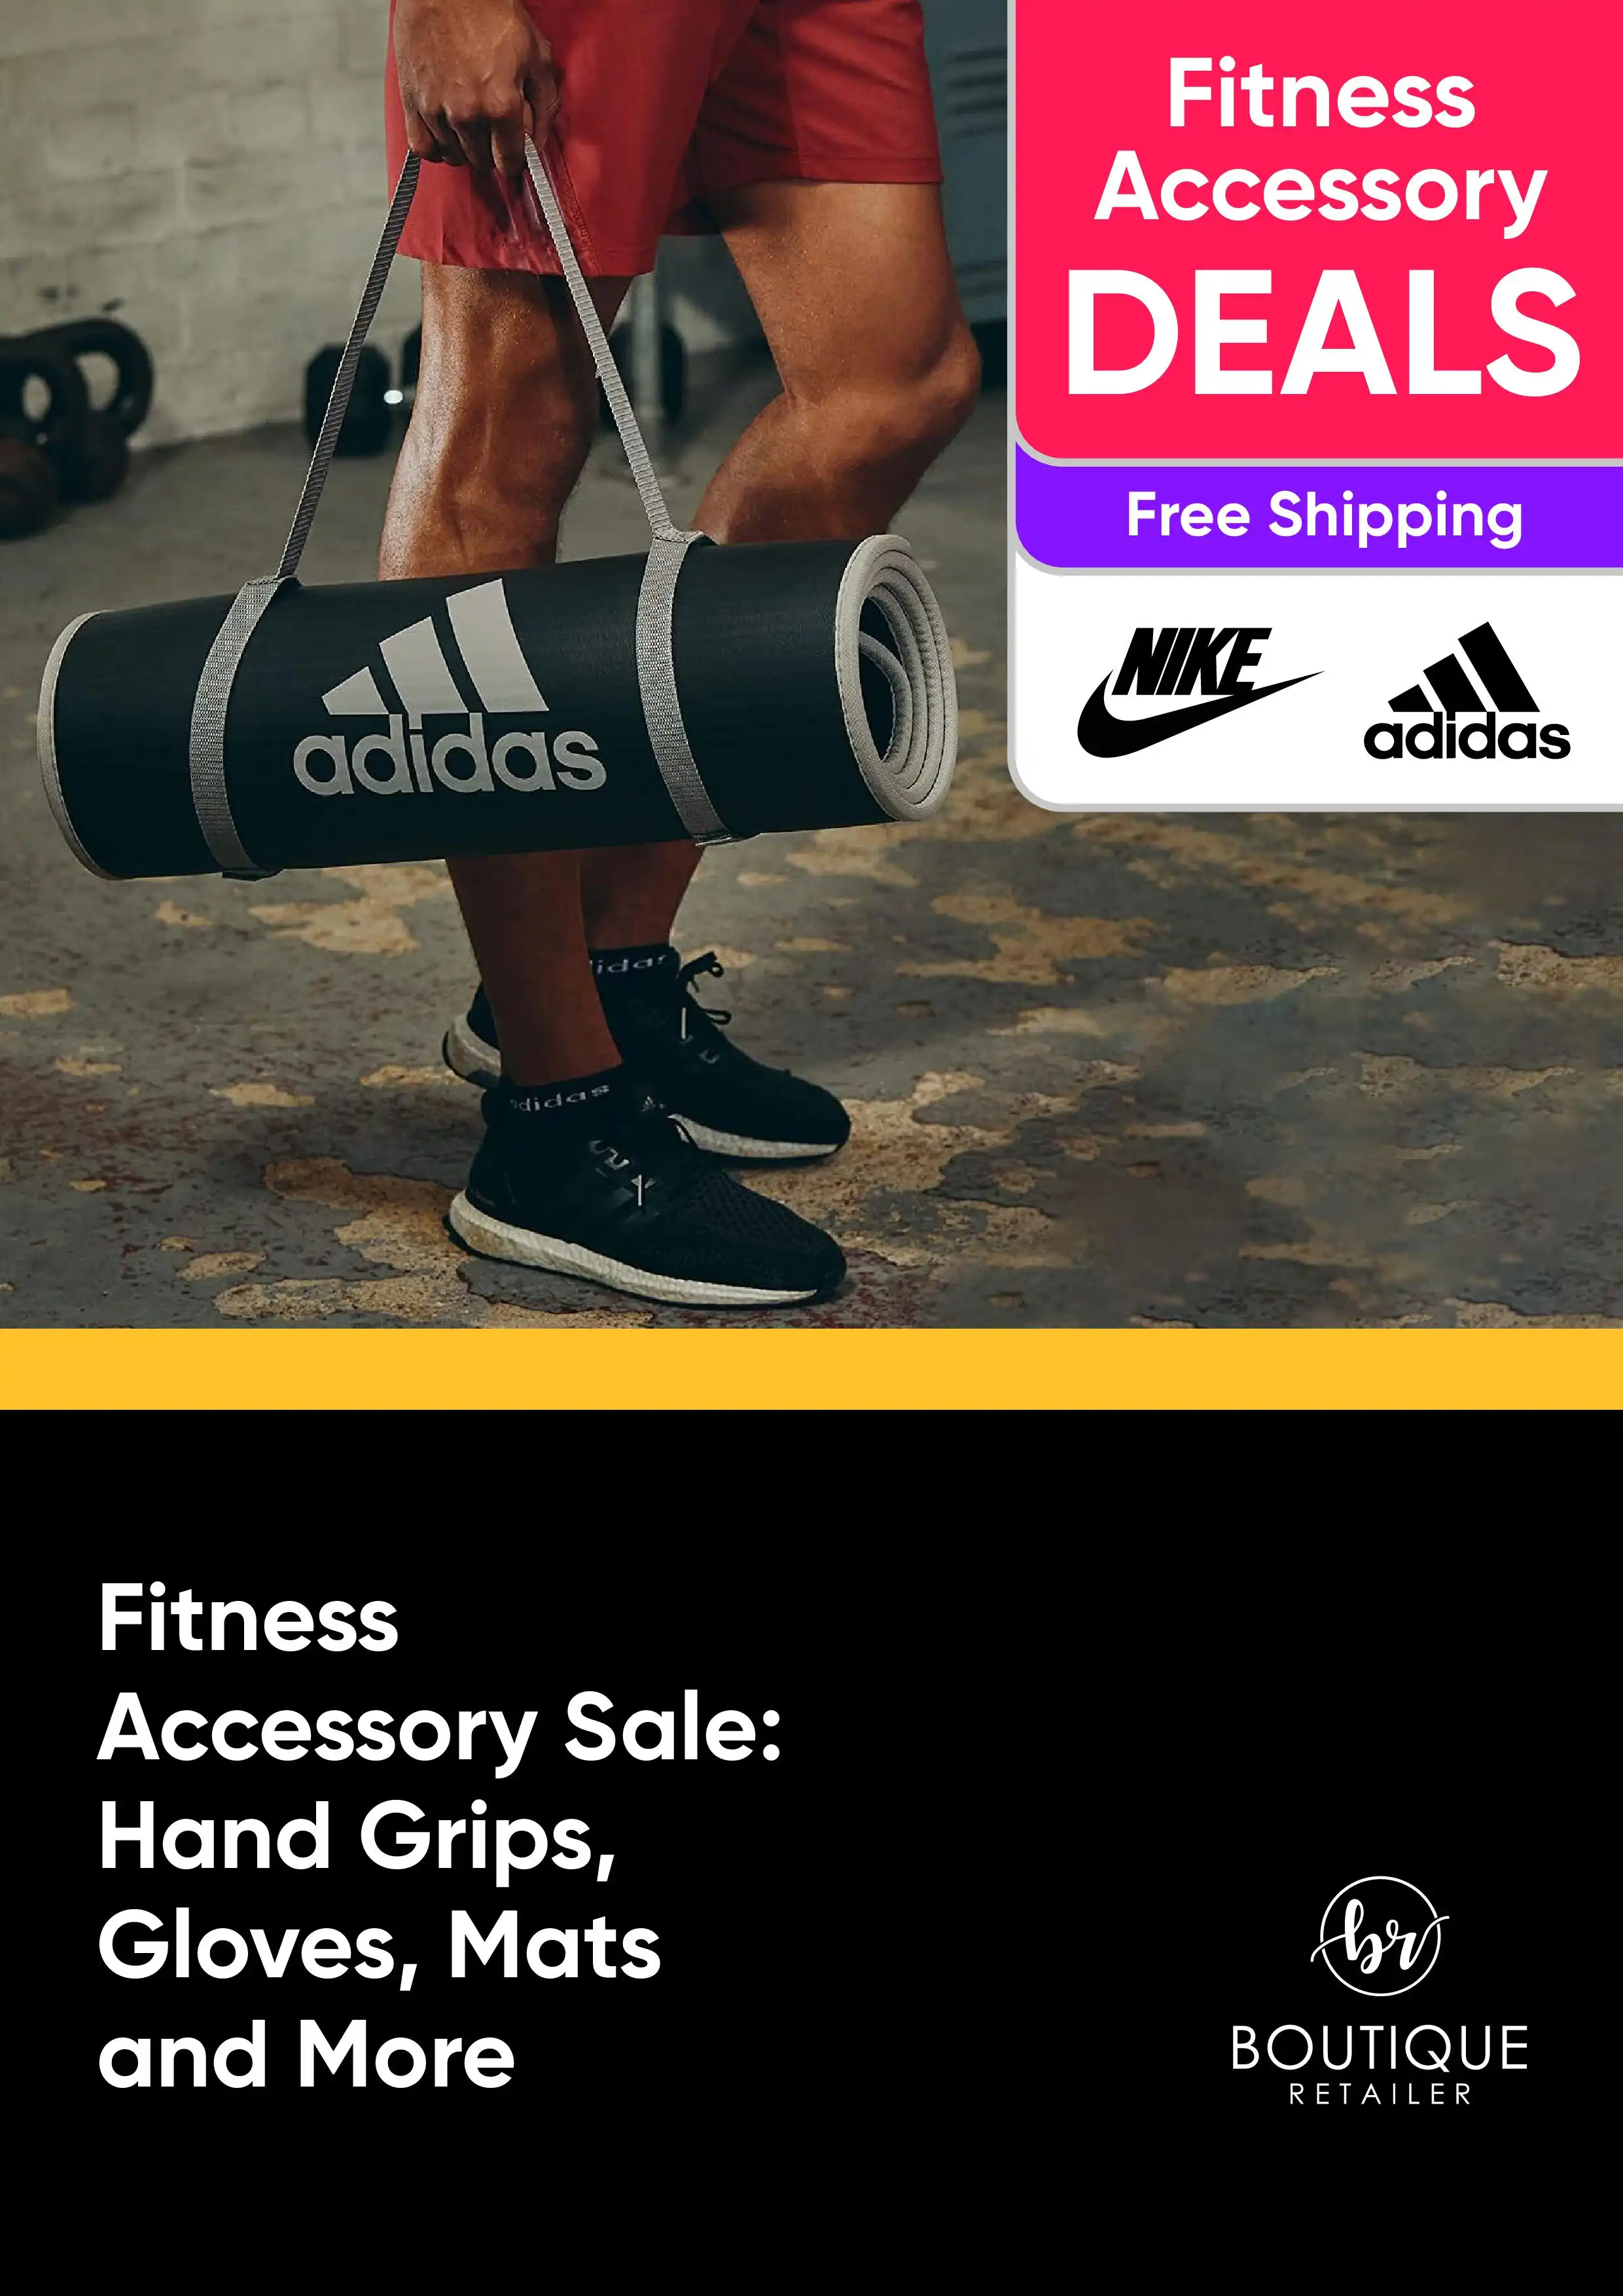 Fitness Accessory Sale - Hand Grips, Gloves, Mats and More - Nike, Adidas - Free Shipping